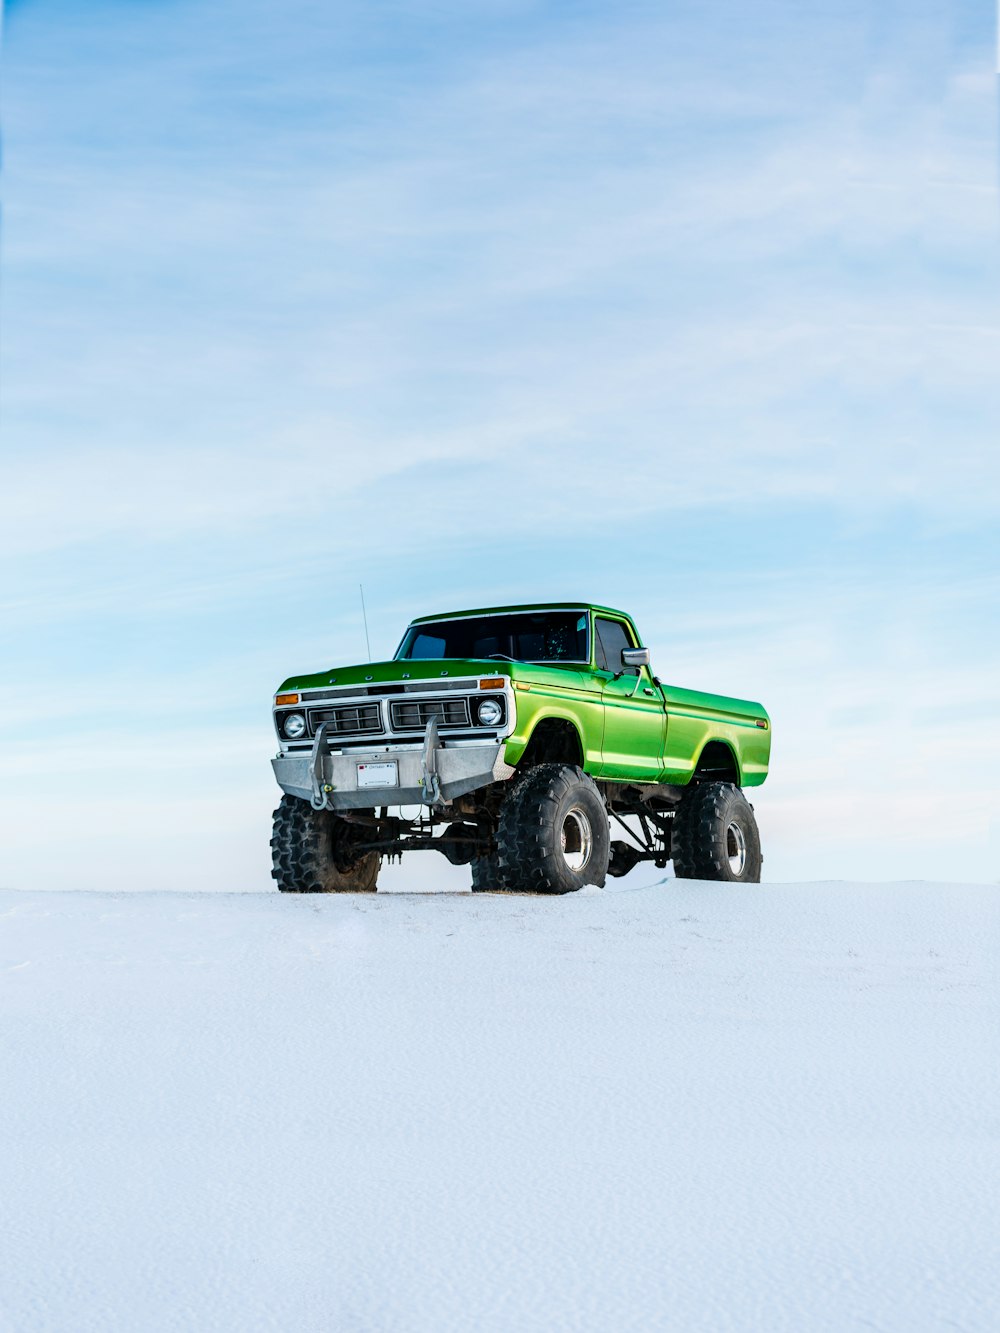 green off-road vehicle on snow during winter season